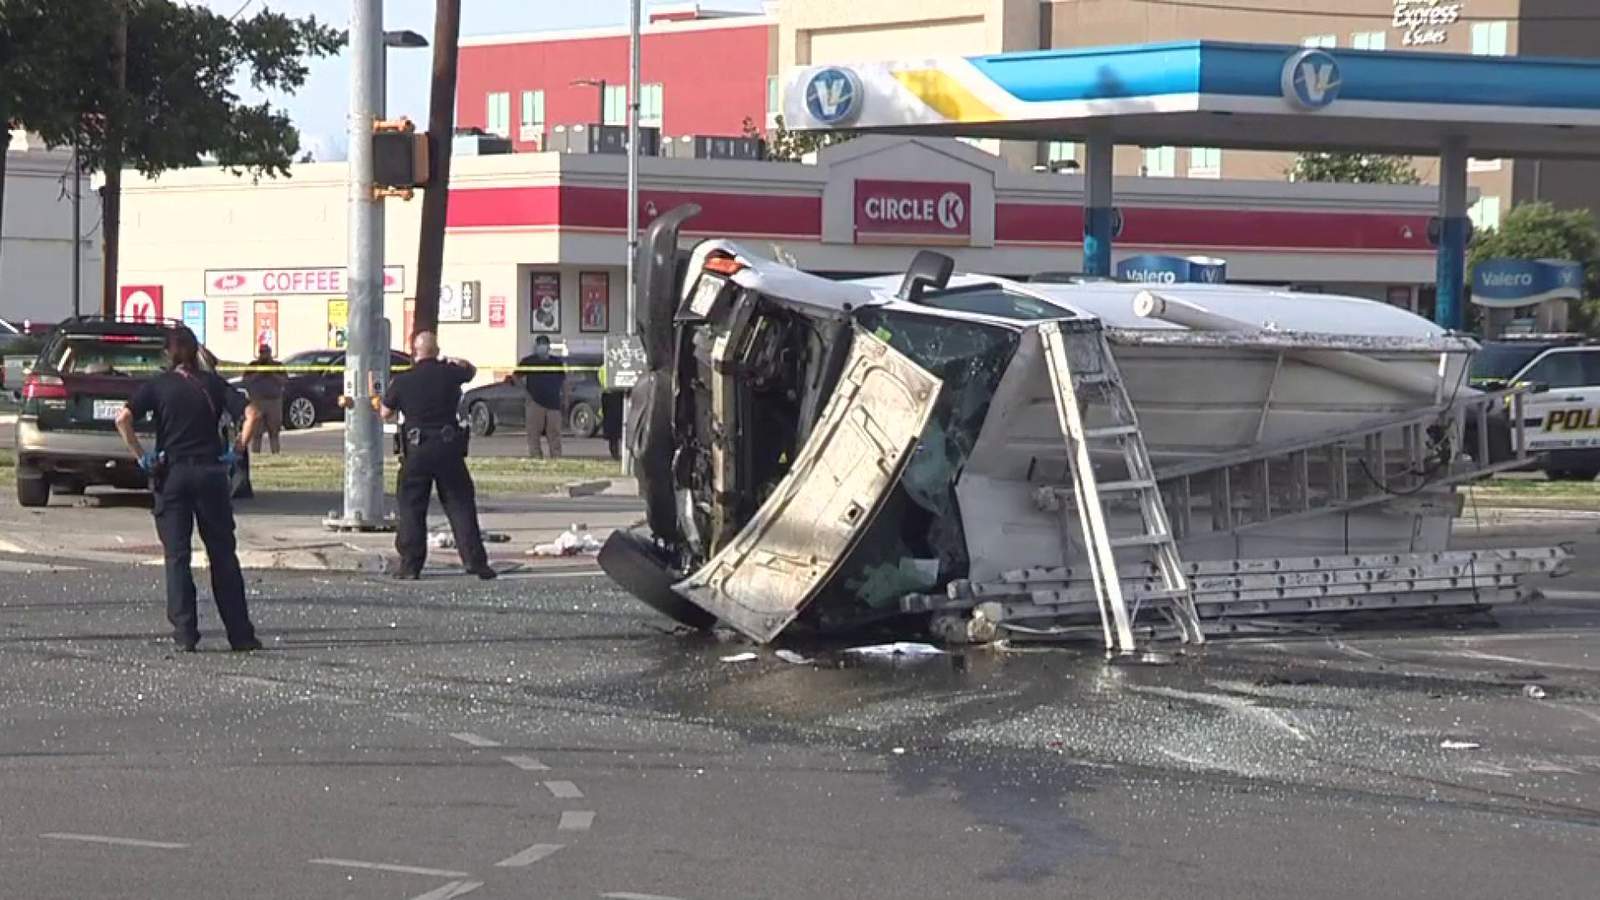 SAPD: Driver who ran 2 red lights, crashed into van had drugs in car, smelled of intoxicants